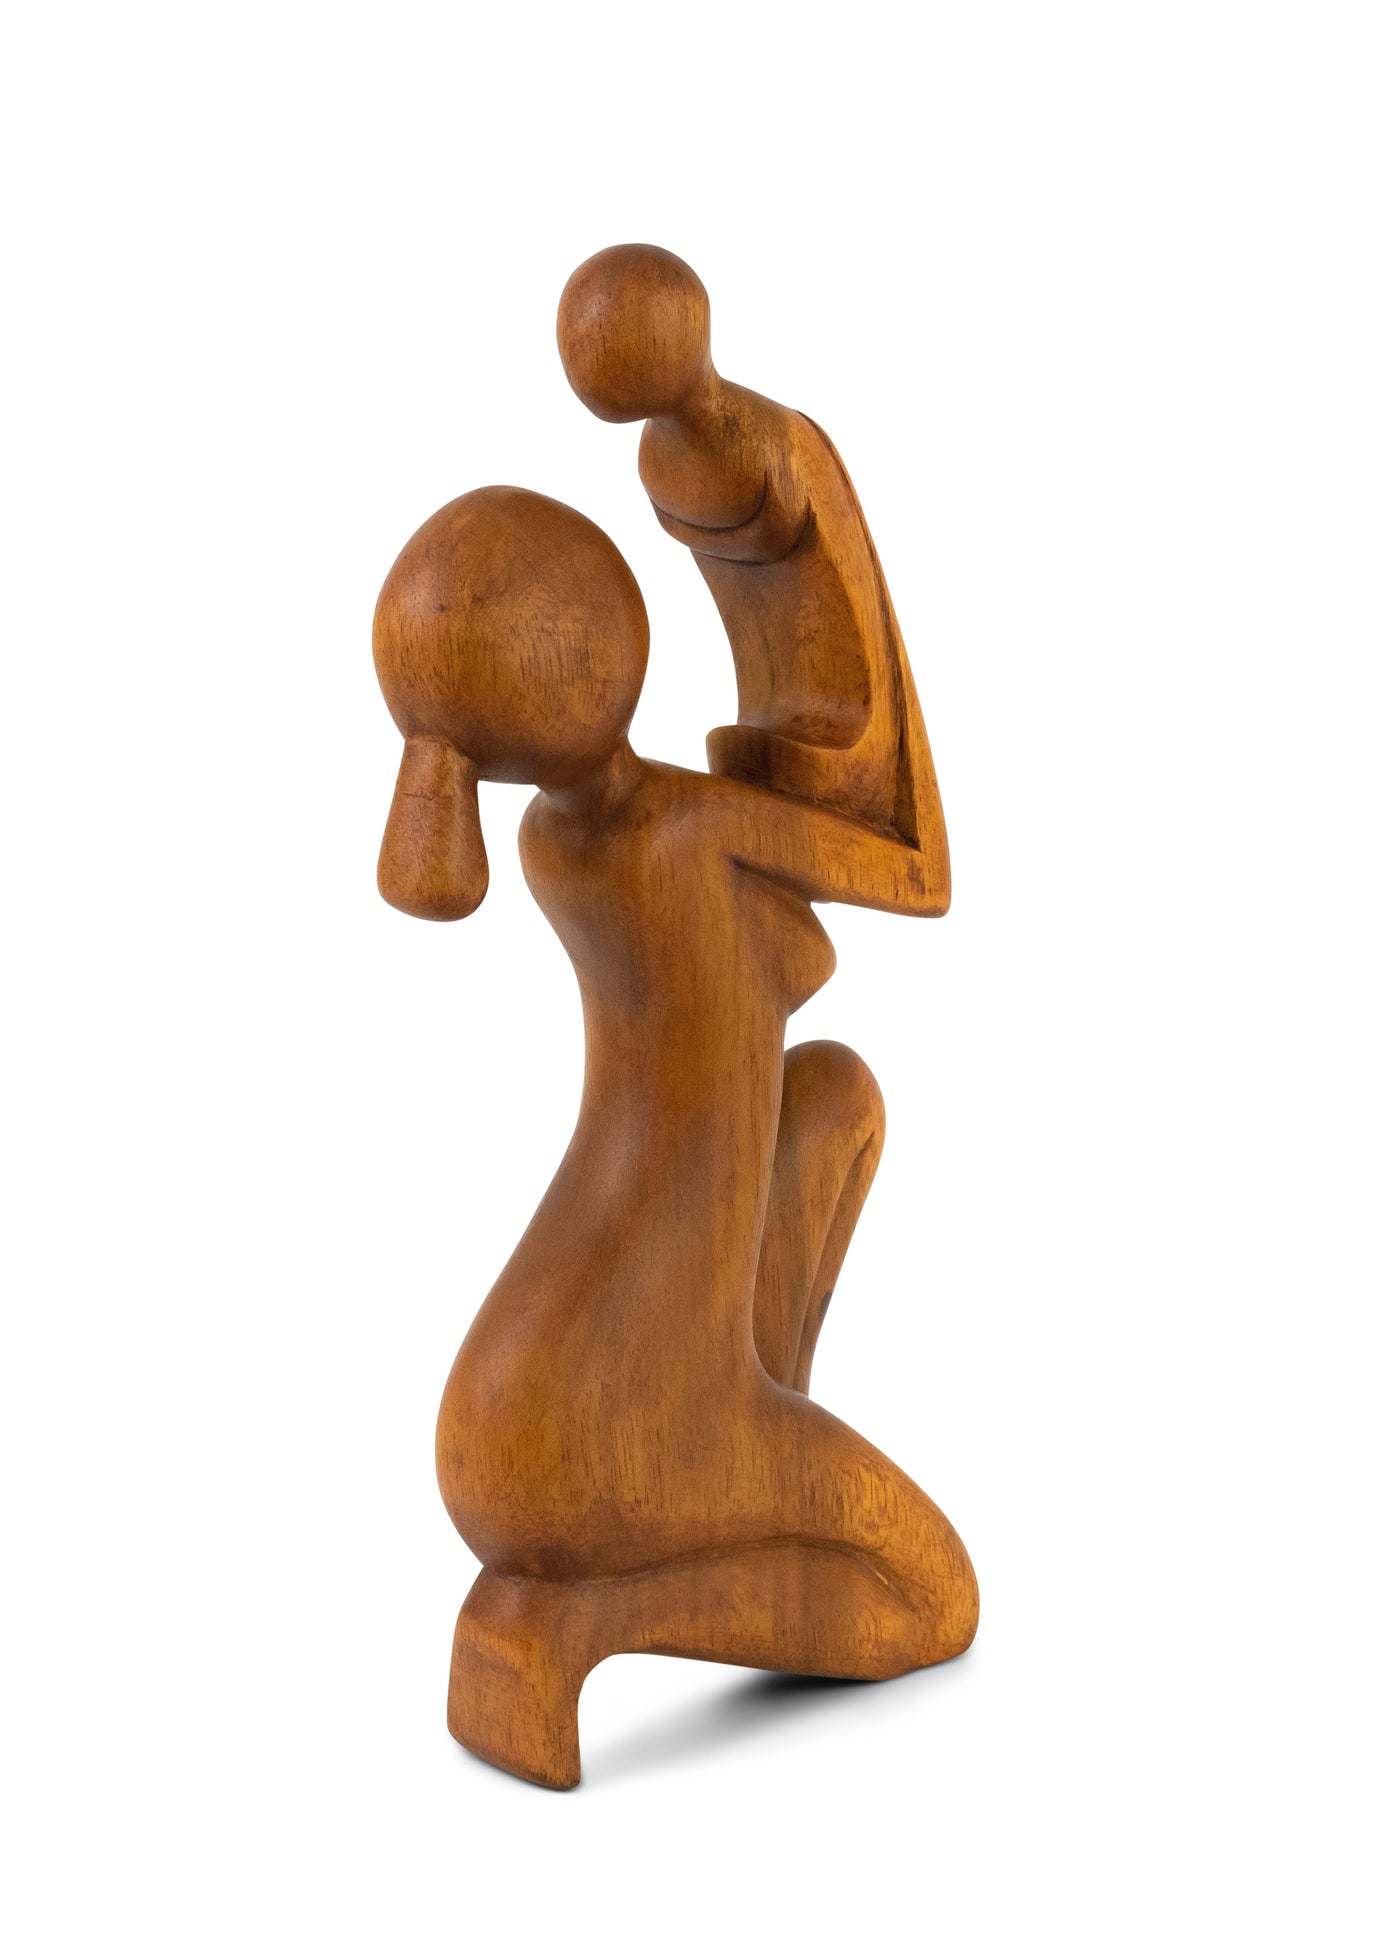 12" Wooden Handmade Abstract Mother and Child Sculpture Handcrafted Gift Art Home Decor Figurine Accent Artwork Hand Carved Mother and Baby Statue